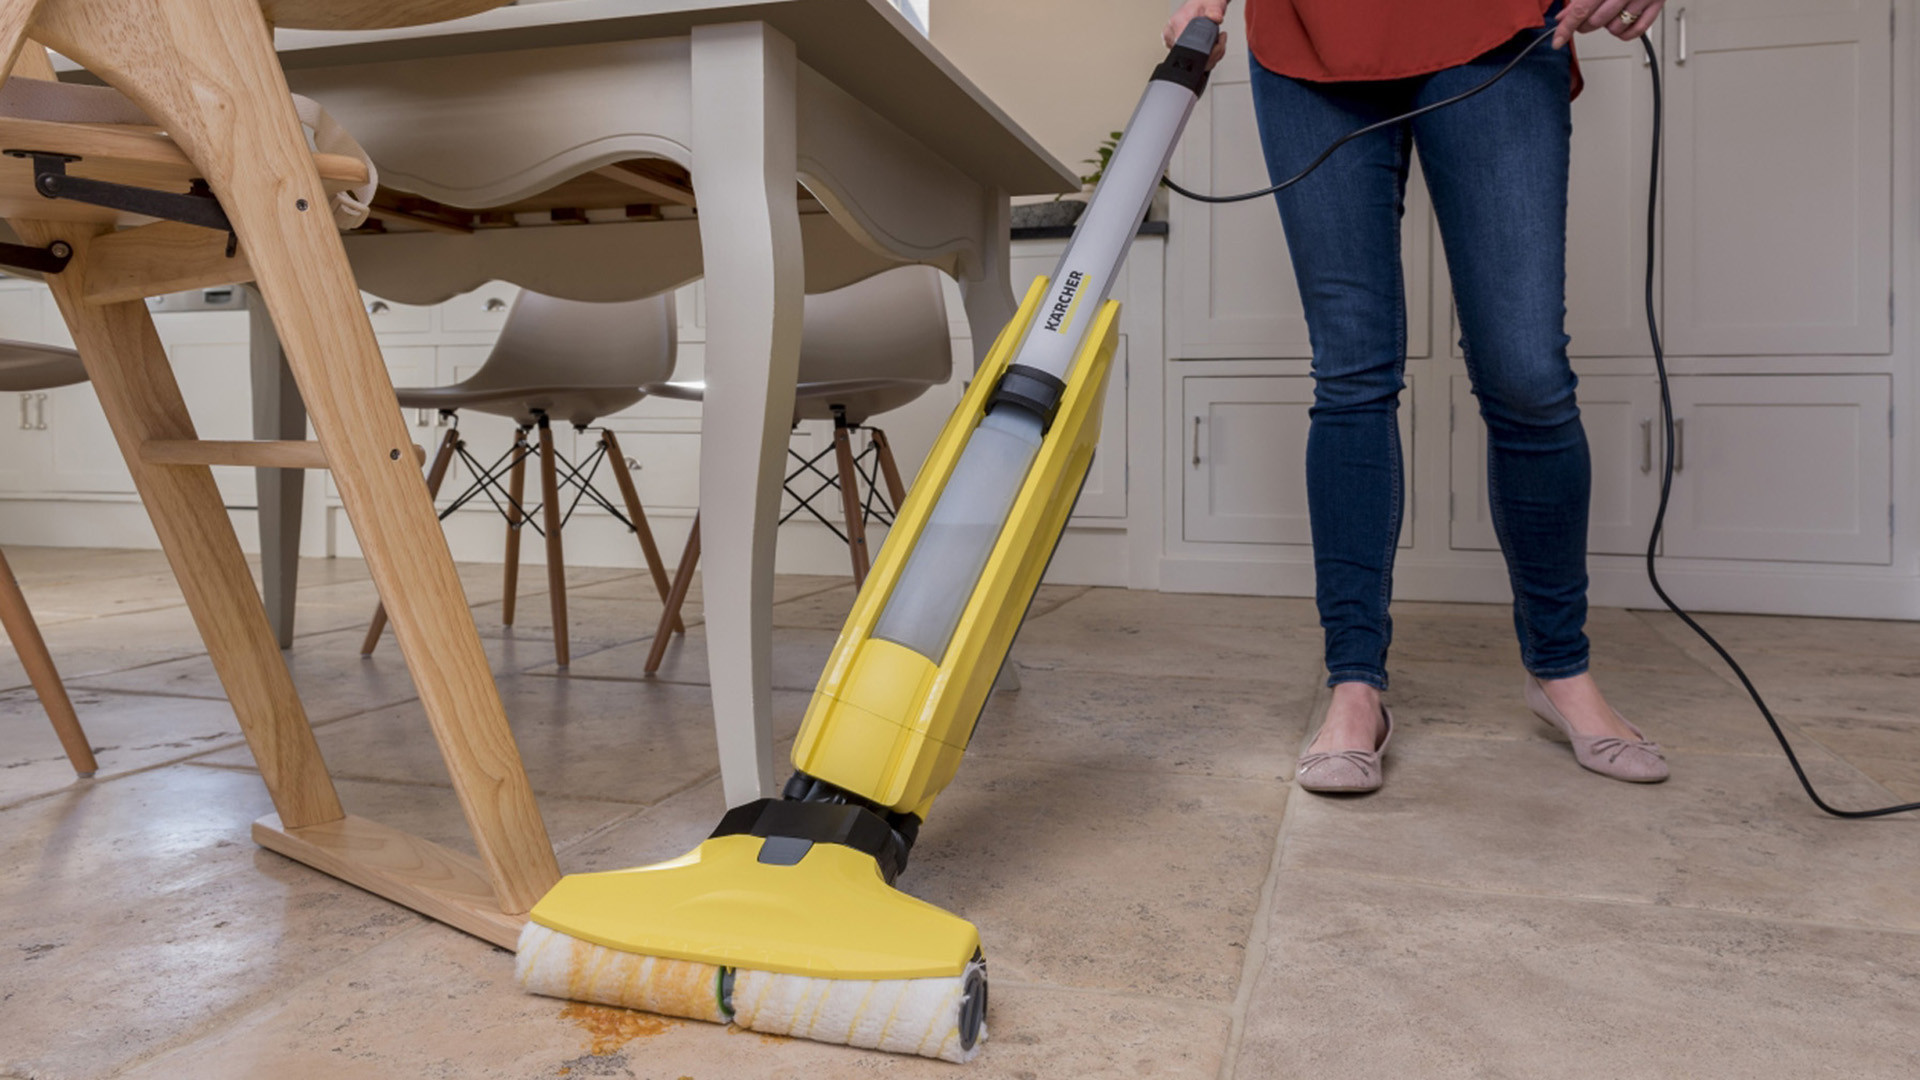 21 Famous Hardwood Floor Cleaning Companies 2024 free download hardwood floor cleaning companies of karcher fc5 hard floor cleaner review trusted reviews regarding karcher fc5 5 1